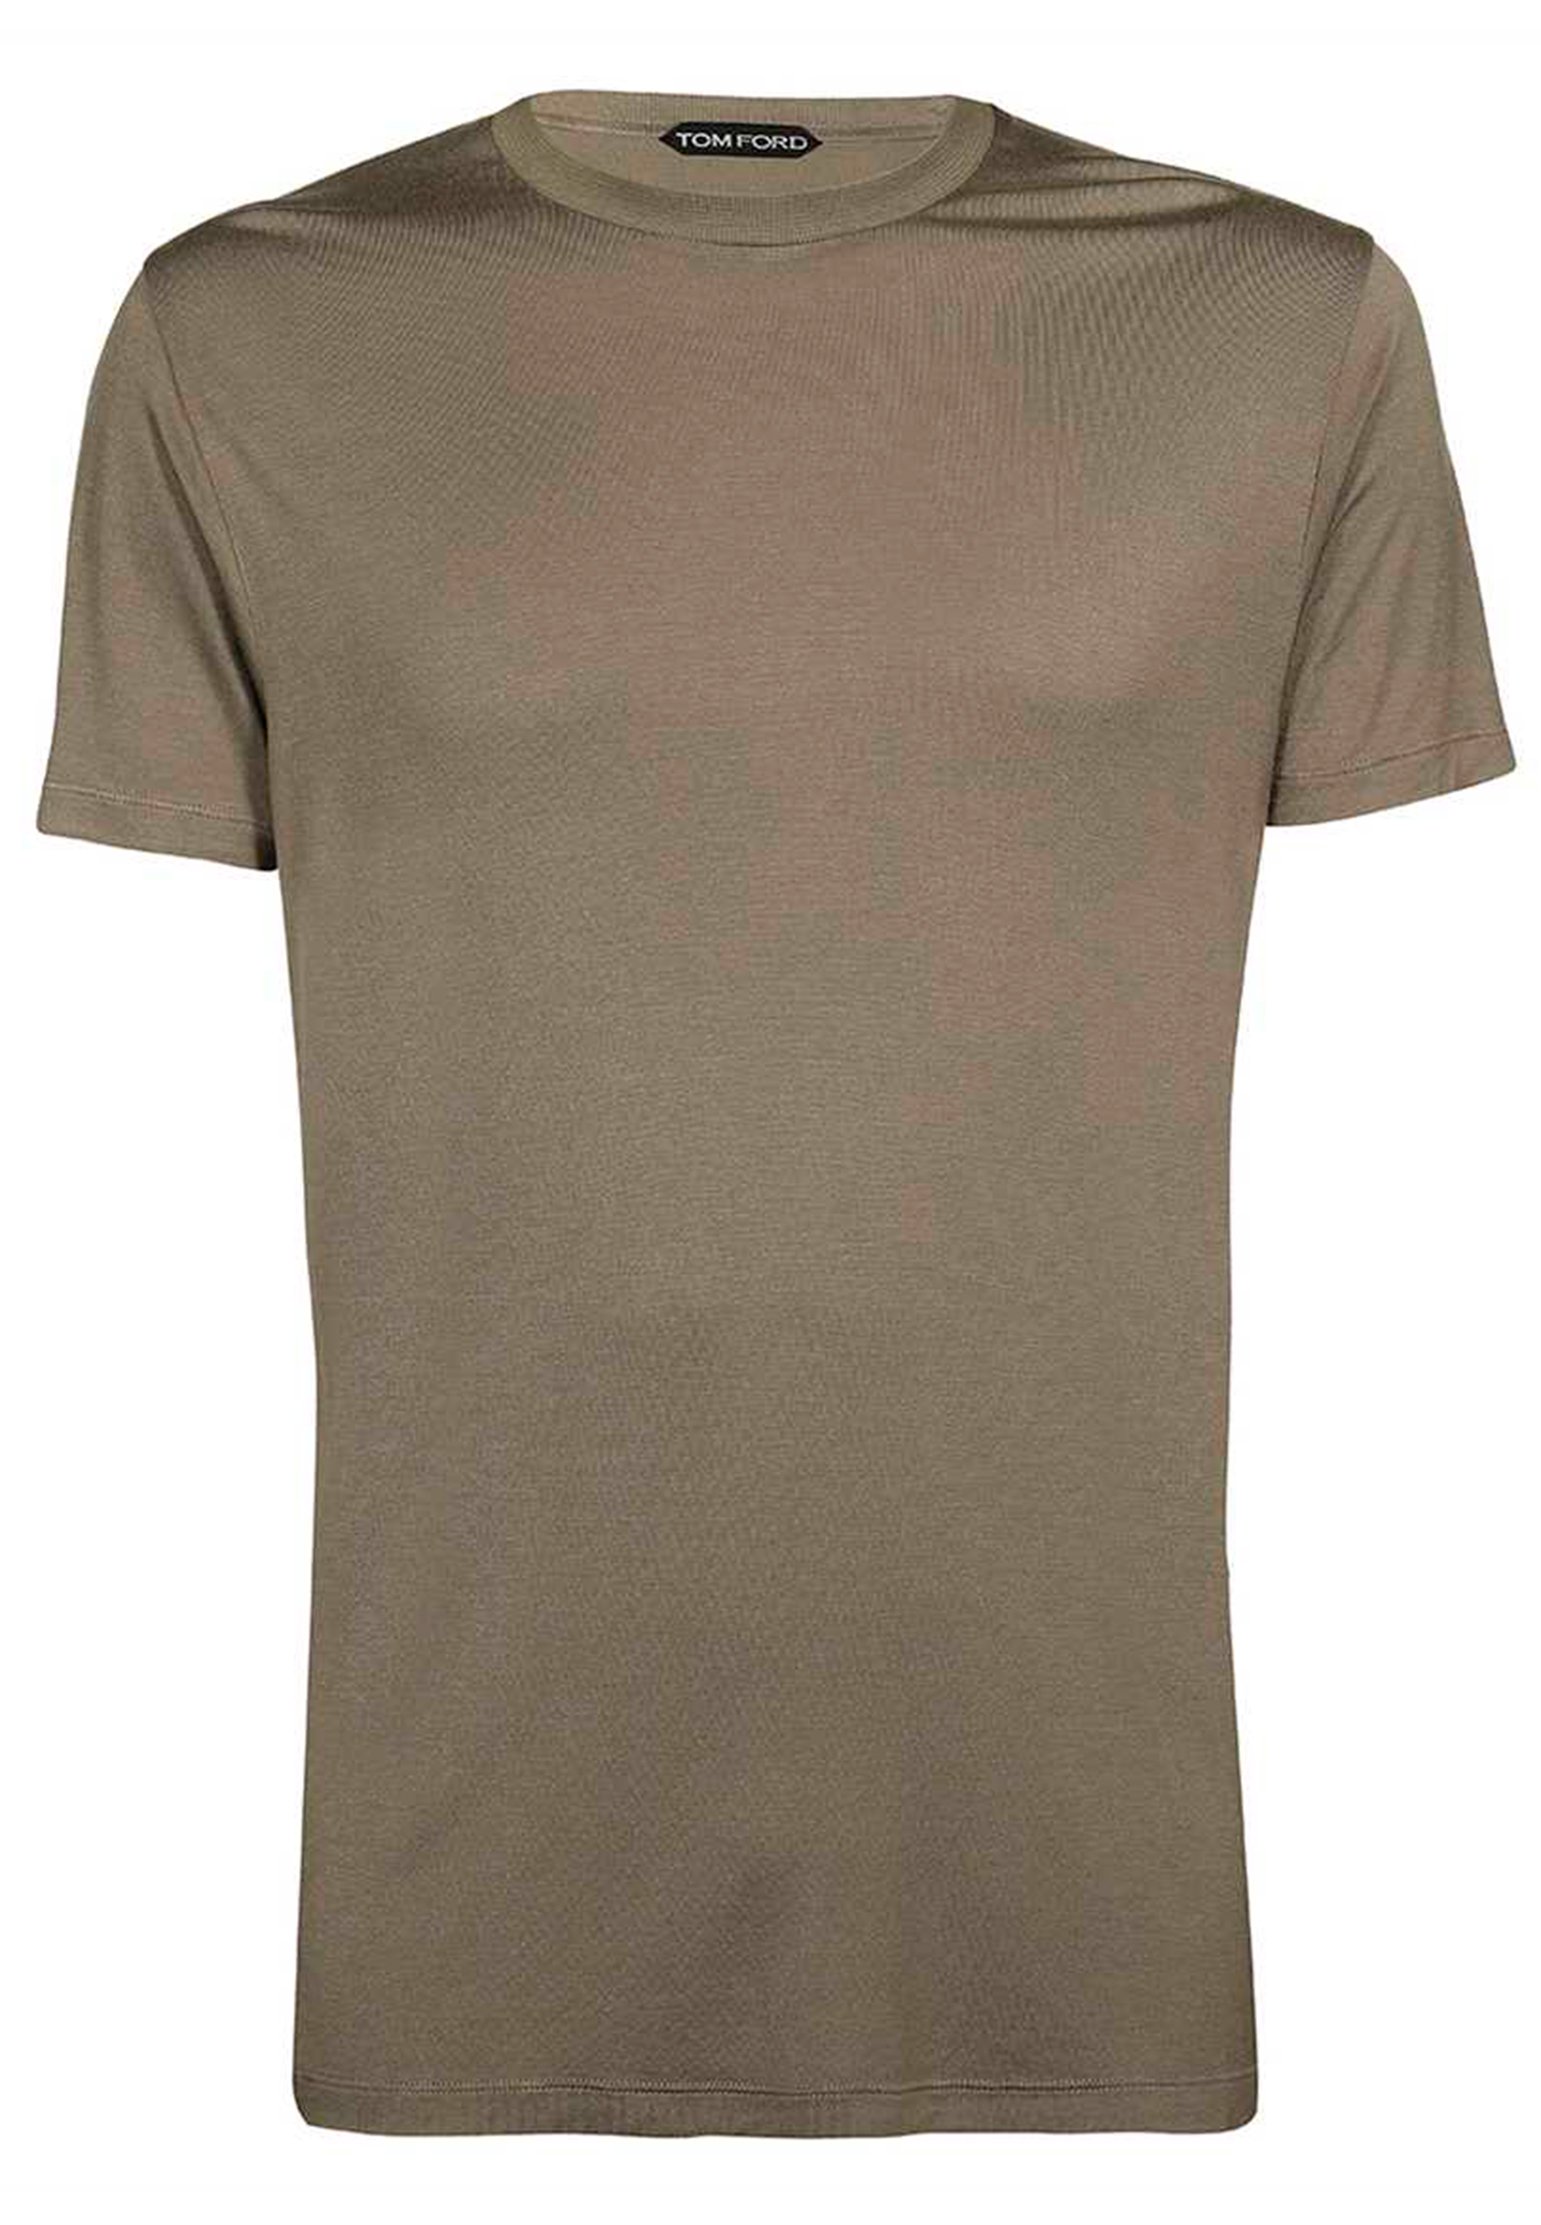 T-Shirt TOM FORD Color: brown (Code: 425) in online store Allure